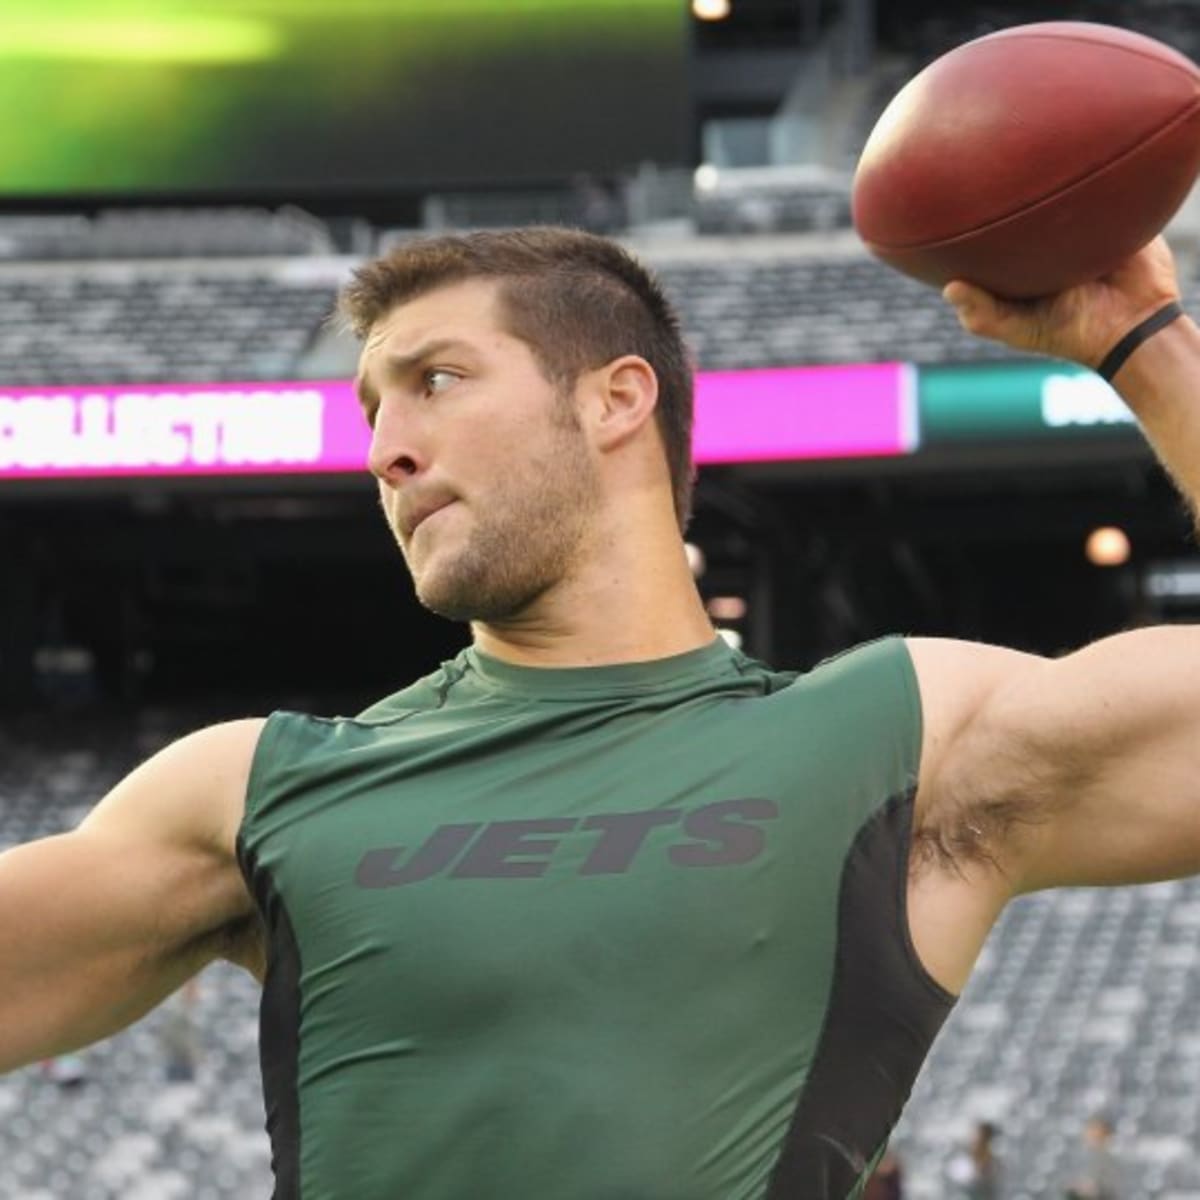 Tim Tebow one of Peoples Sexiest Men Alive